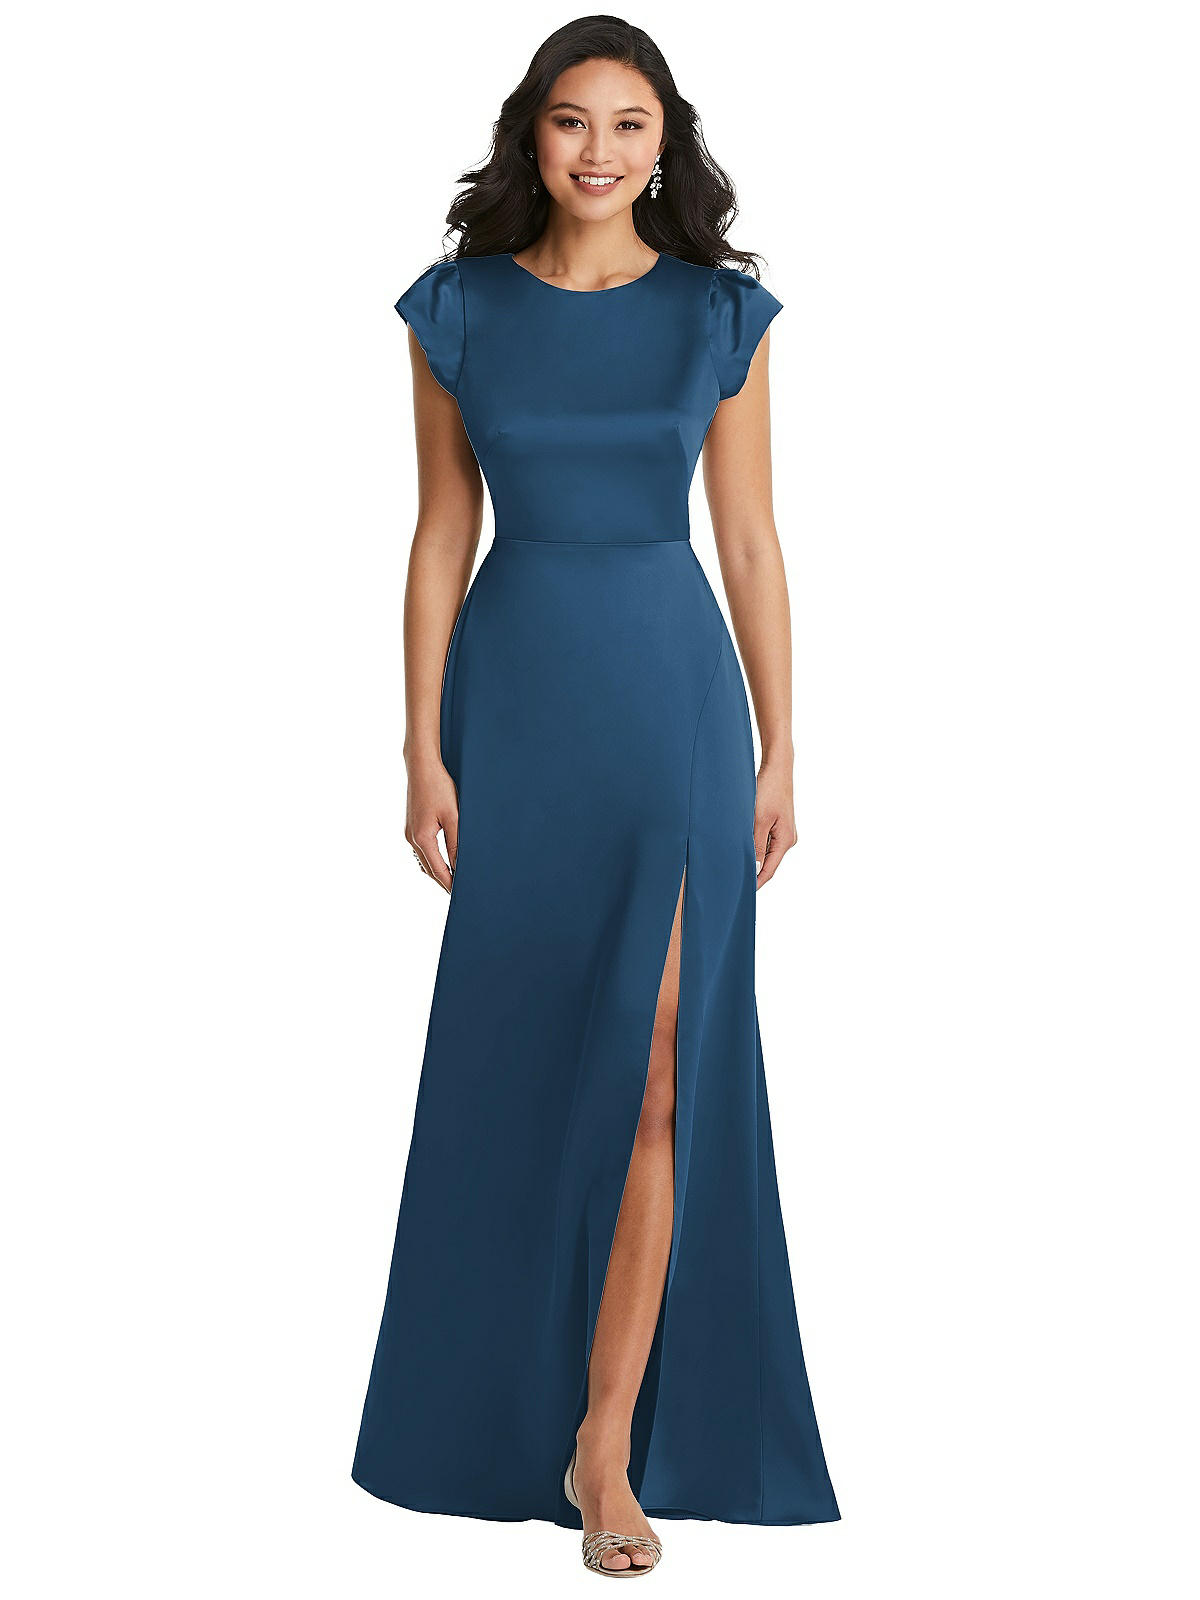 Shirred Cap Sleeve Maxi Dress with Keyhole Cutout Back | The Dessy Group